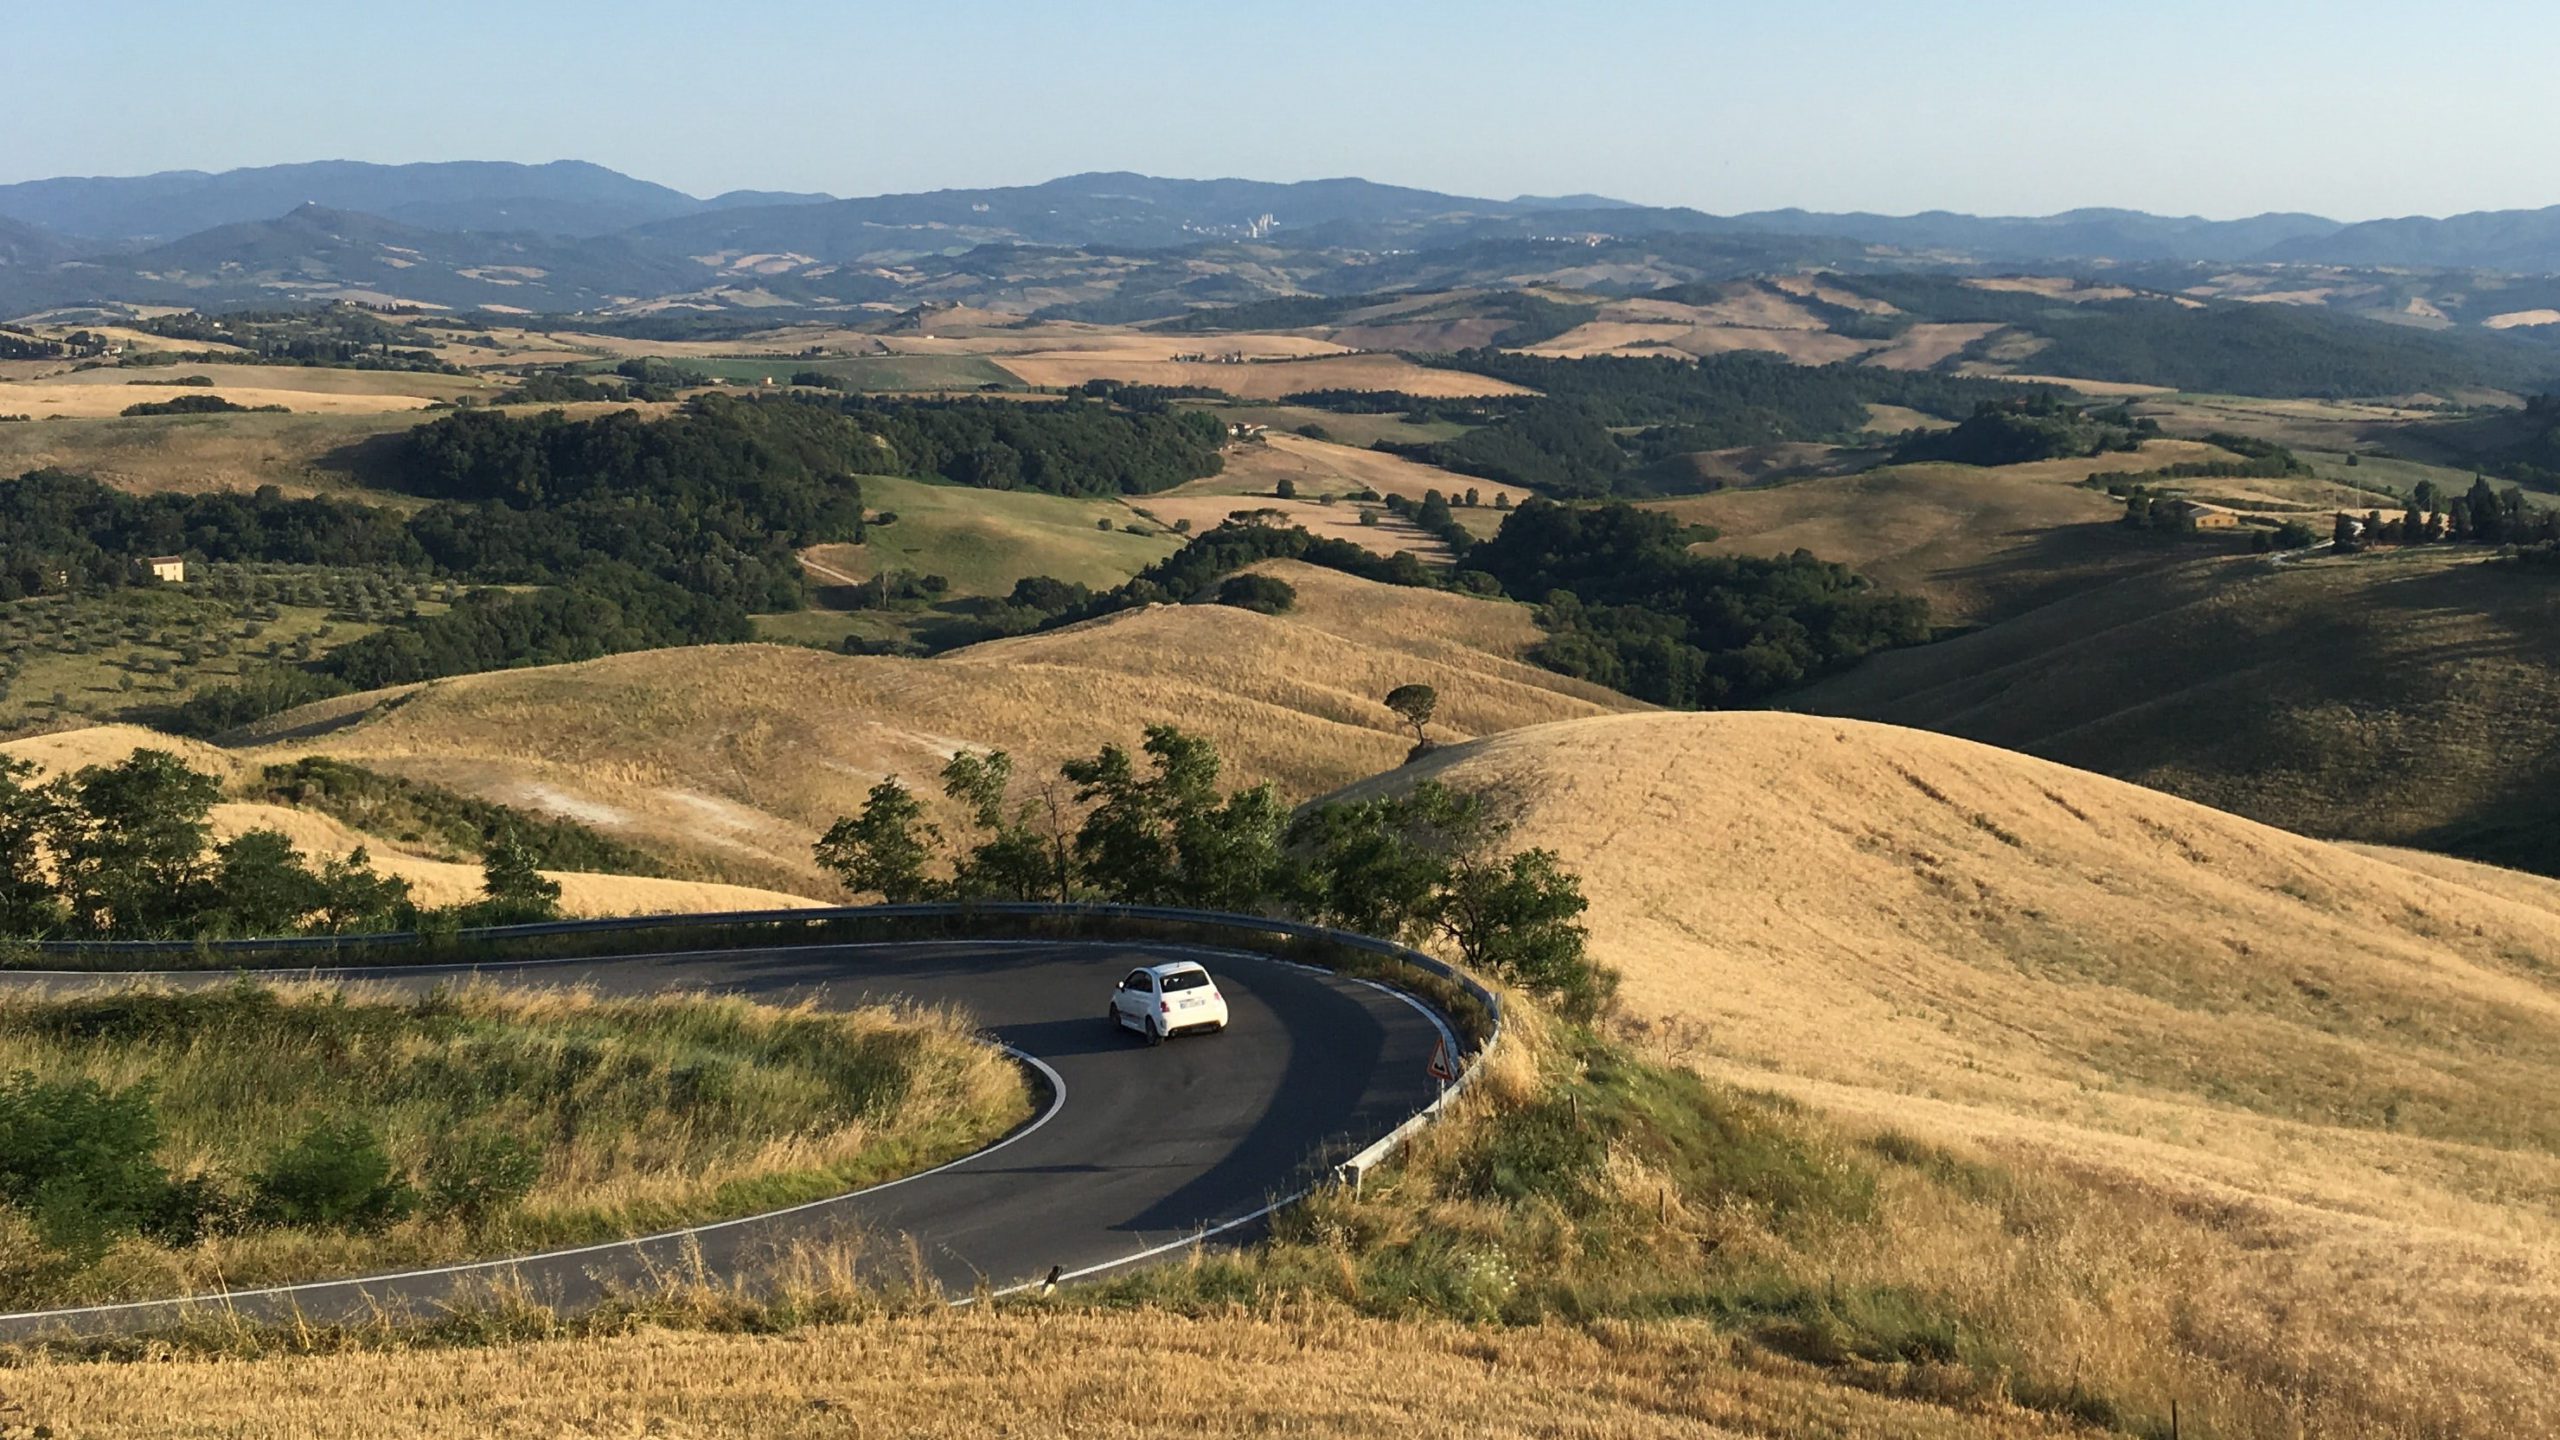 A small white car driving in Italy takes a sharp turn on a paved road with views of the stunning Italian countryside.